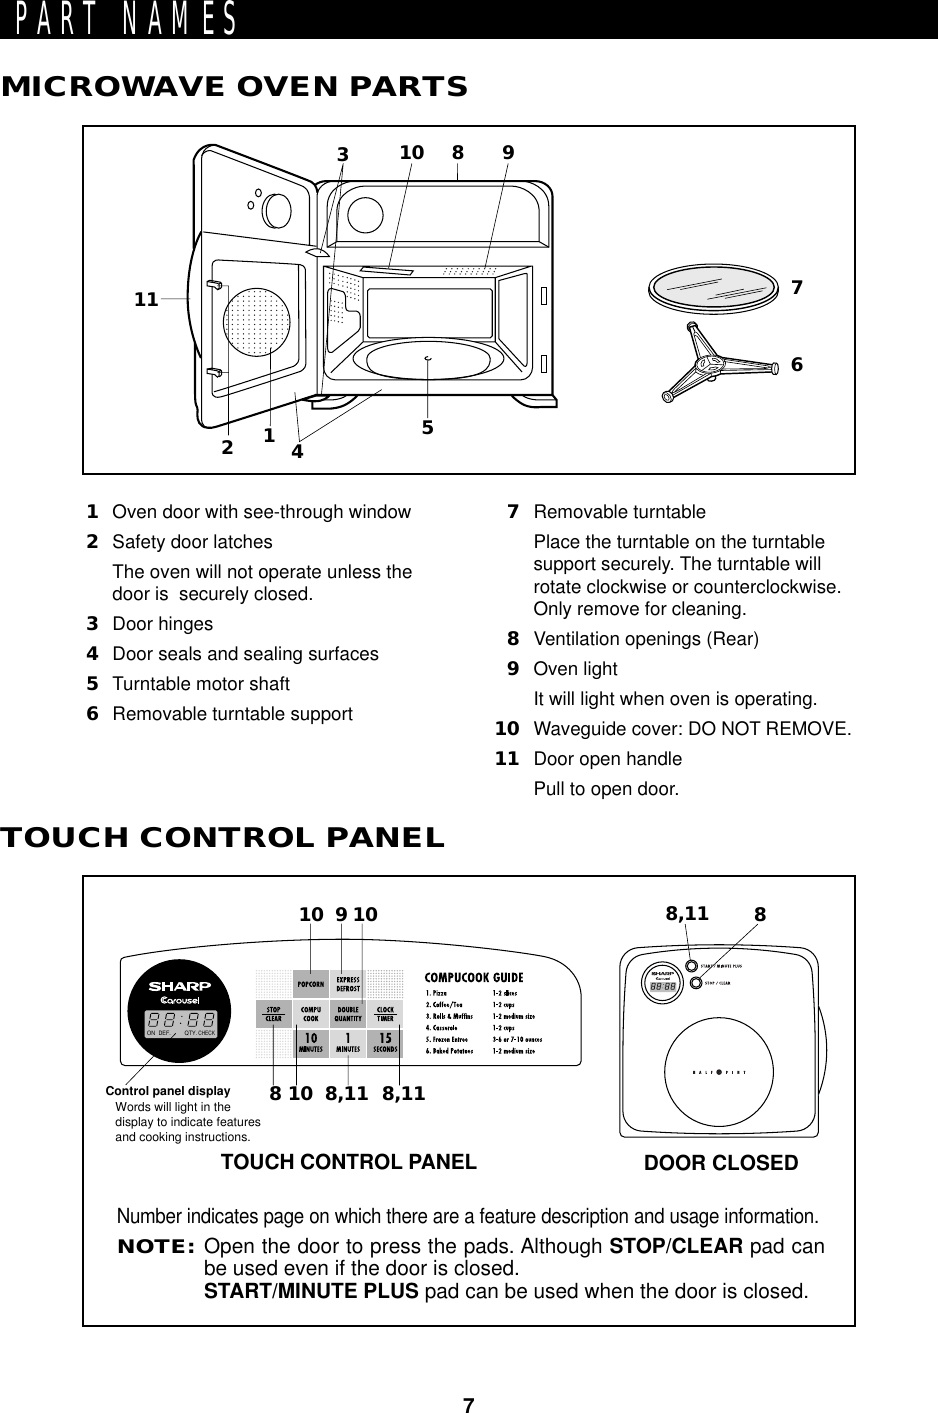 7PART NAMES1Oven door with see-through window2Safety door latchesThe oven will not operate unless thedoor is  securely closed.3Door hinges4Door seals and sealing surfaces5Turntable motor shaft6Removable turntable support7Removable turntablePlace the turntable on the turntablesupport securely. The turntable willrotate clockwise or counterclockwise.Only remove for cleaning.8Ventilation openings (Rear)9Oven lightIt will light when oven is operating.10 Waveguide cover: DO NOT REMOVE.11 Door open handlePull to open door.MICROWAVE OVEN PARTSTOUCH CONTROL PANEL12113476910 85DEF. QTY.CHECKON10 1098,118,118,118810Control panel displayWords will light in the display to indicate features and cooking instructions.Number indicates page on which there are a feature description and usage information.NOTE:Open the door to press the pads. Although STOP/CLEAR pad canbe used even if the door is closed.START/MINUTE PLUS pad can be used when the door is closed.TOUCH CONTROL PANEL DOOR CLOSED